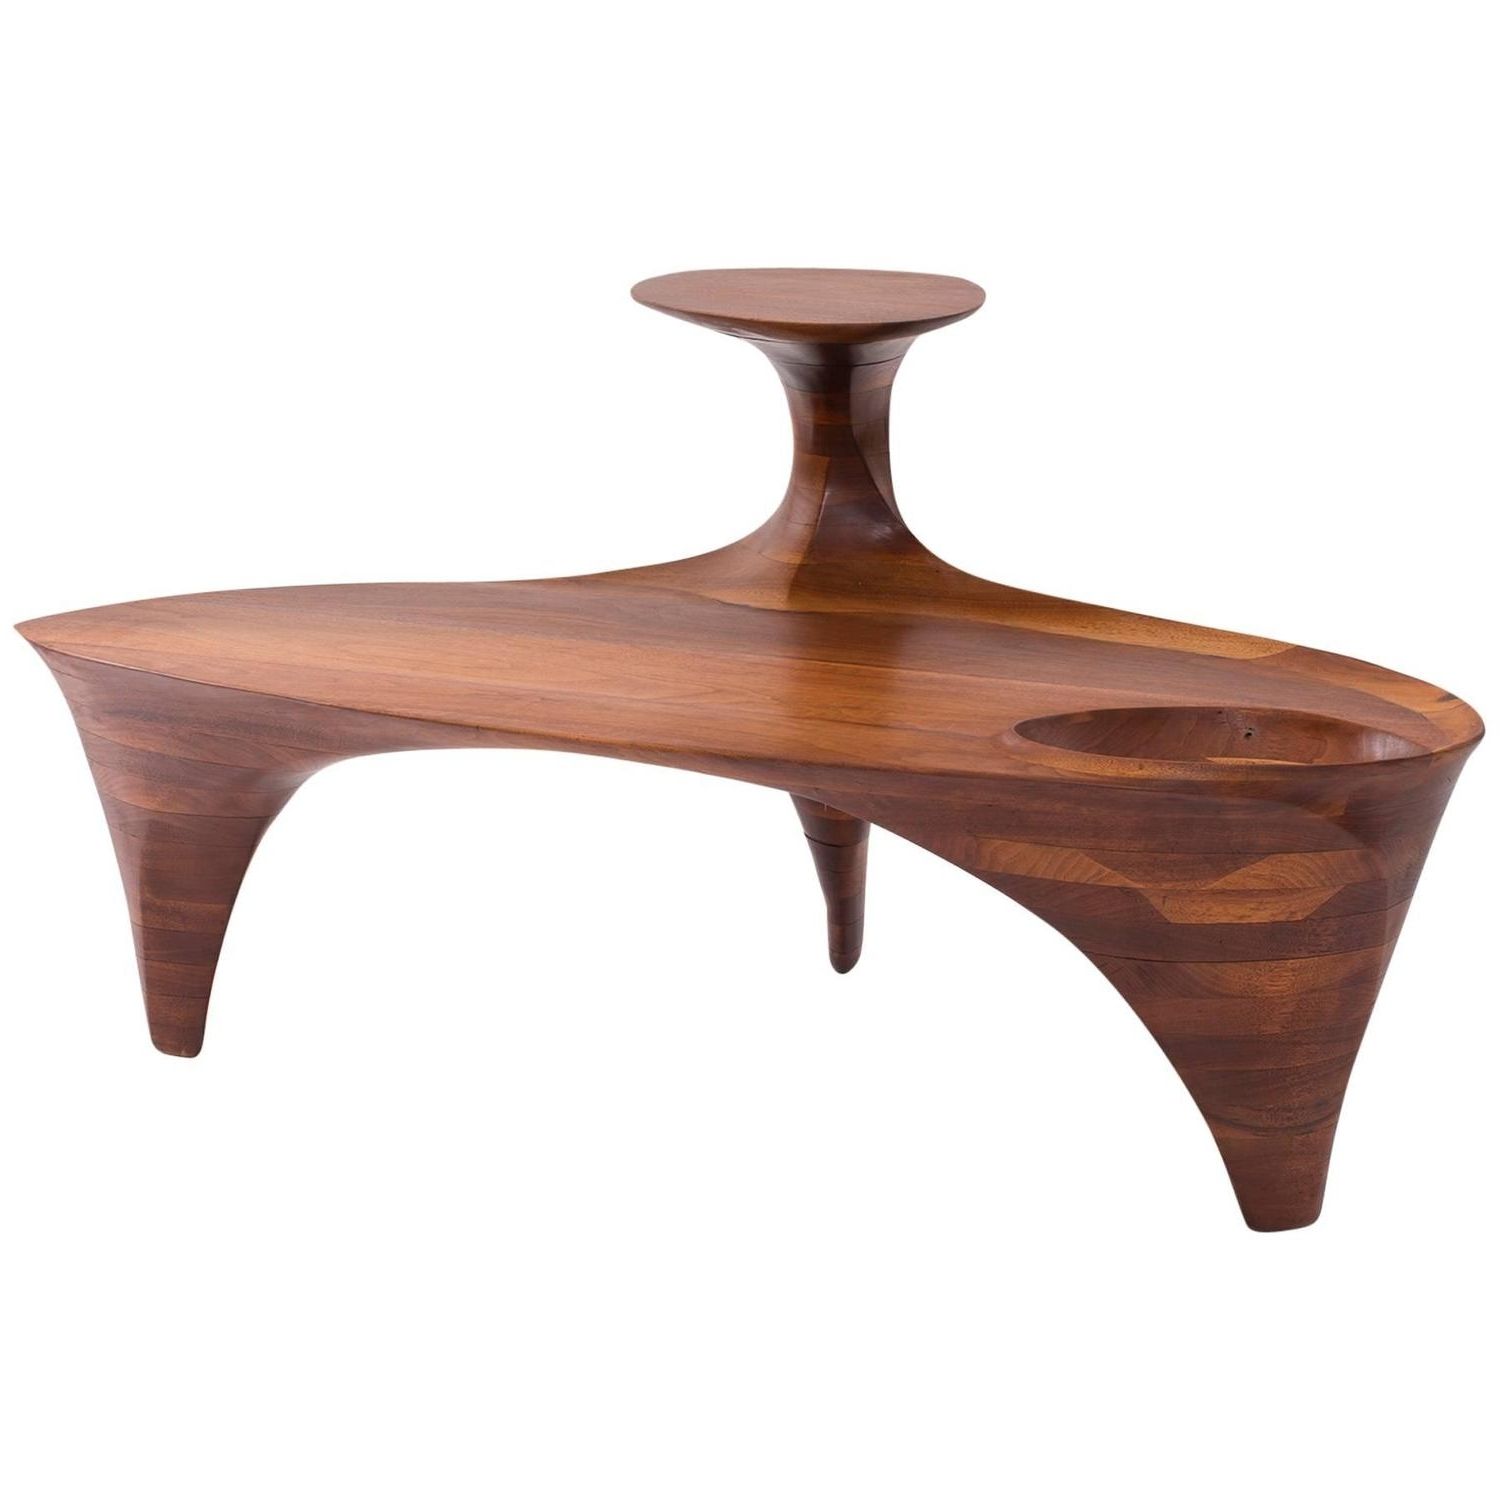 One Off Allen Ditson Walnut Cocktail Table At 1stdibs Intended For Recent Allen Cocktail Tables (Gallery 18 of 20)